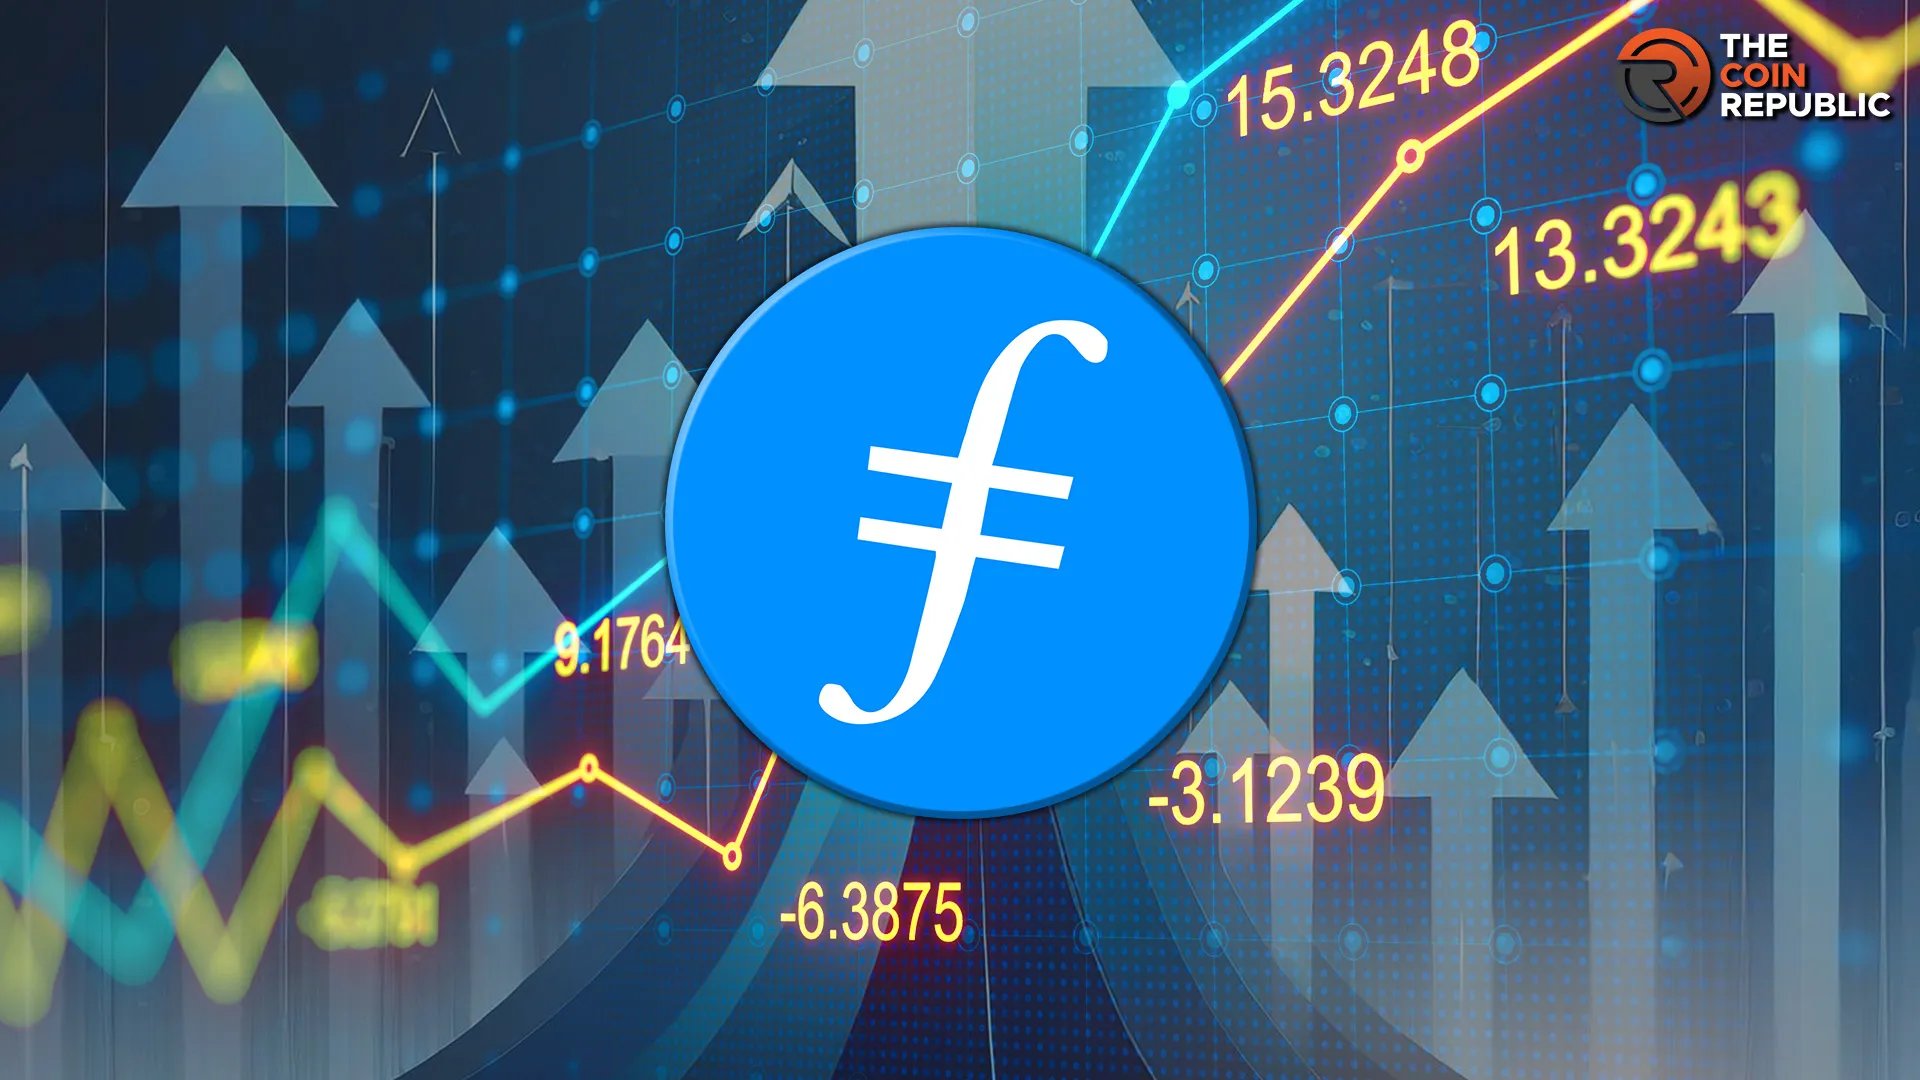 Filecoin Price Prediction: Will The Bull Rally Extend Beyond $10?